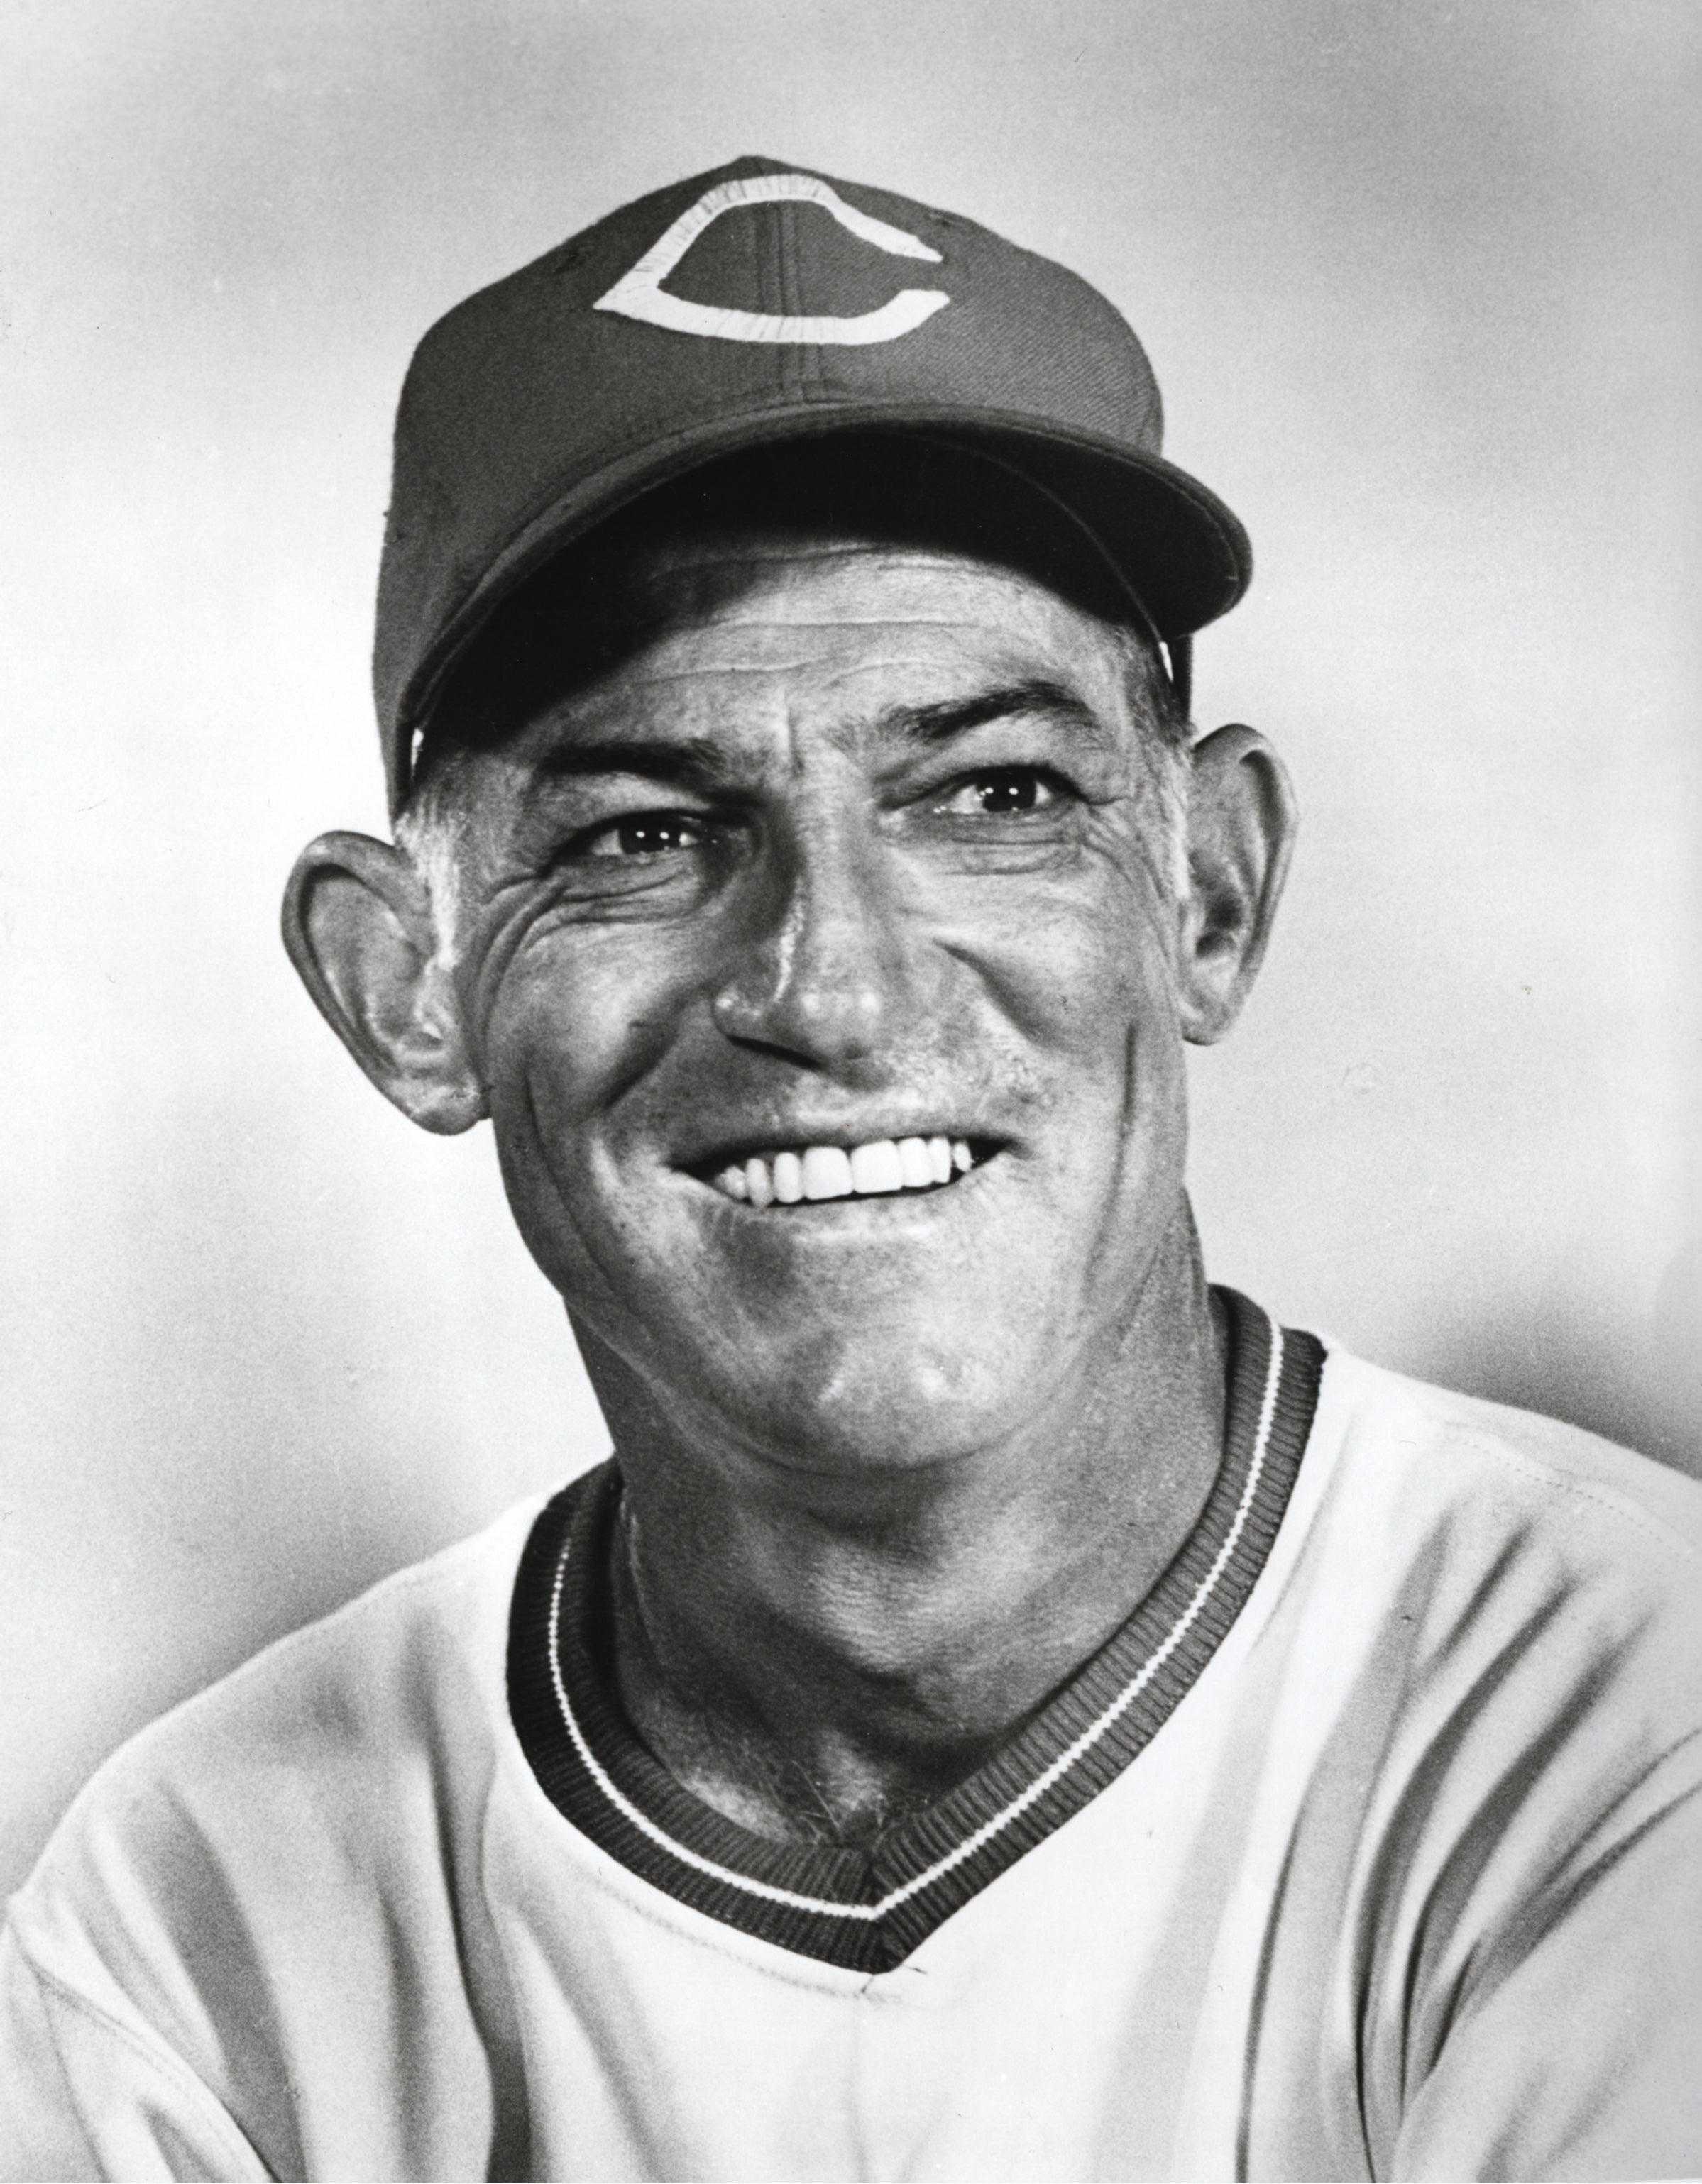 Hall of Fame manager Sparky Anderson born